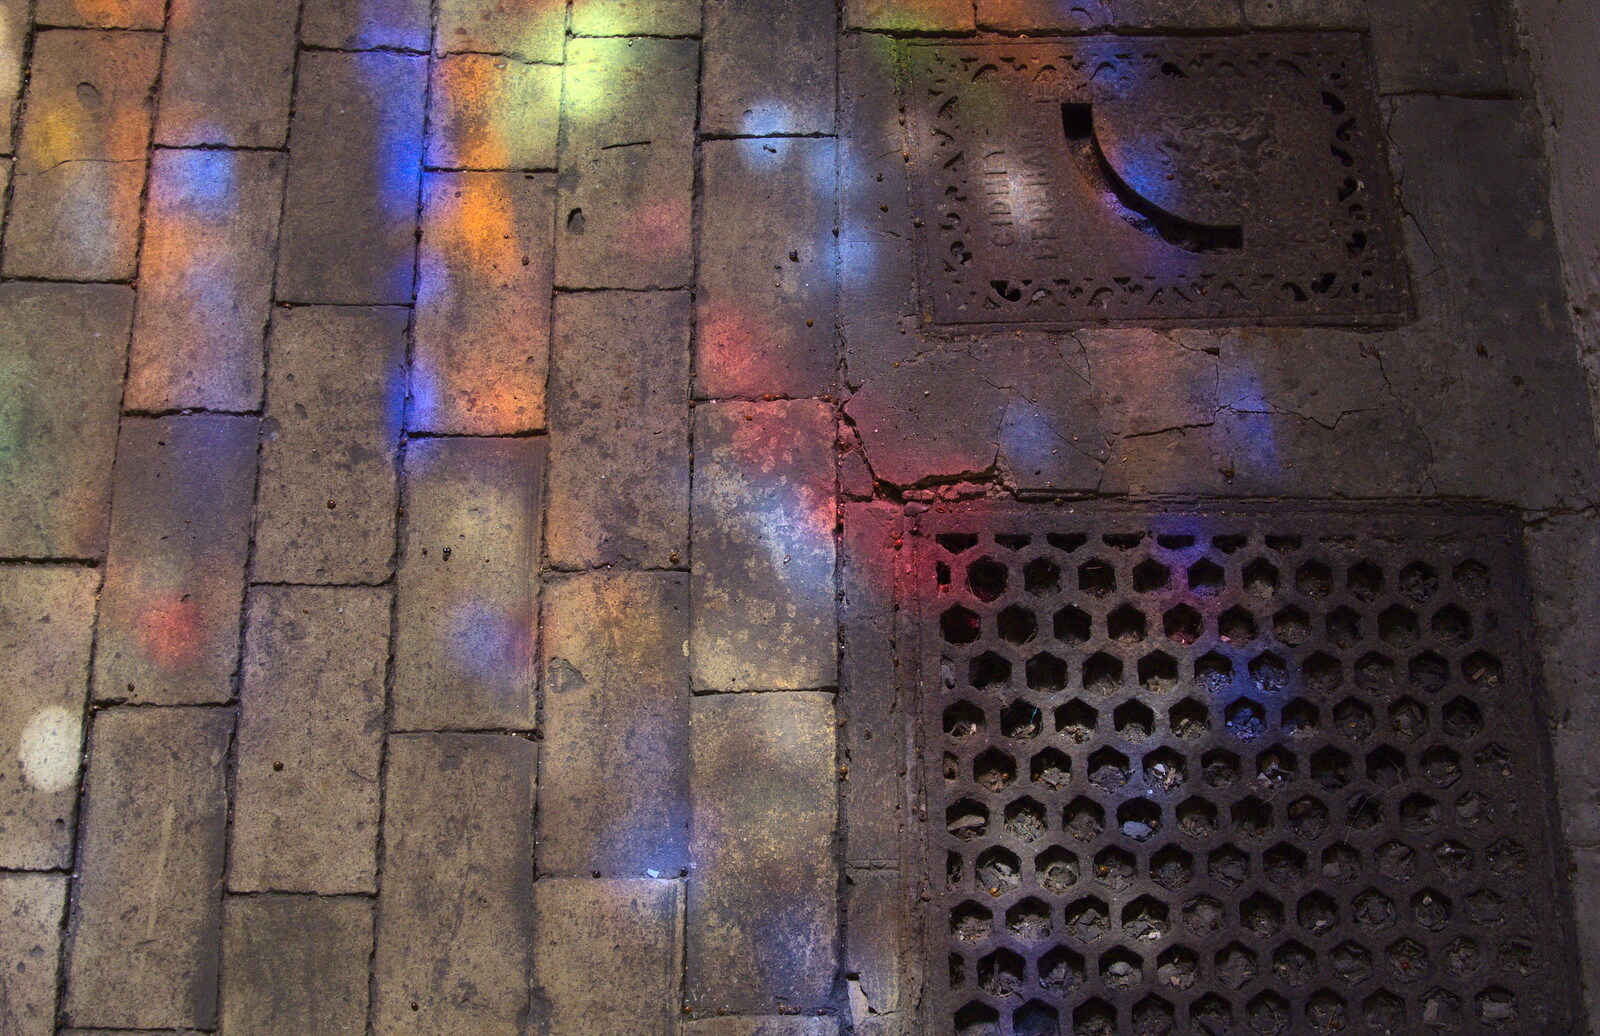 Stained-glass light plays on the tiled floor from Camping at Dower House, West Harling, Norfolk - 1st July 2017